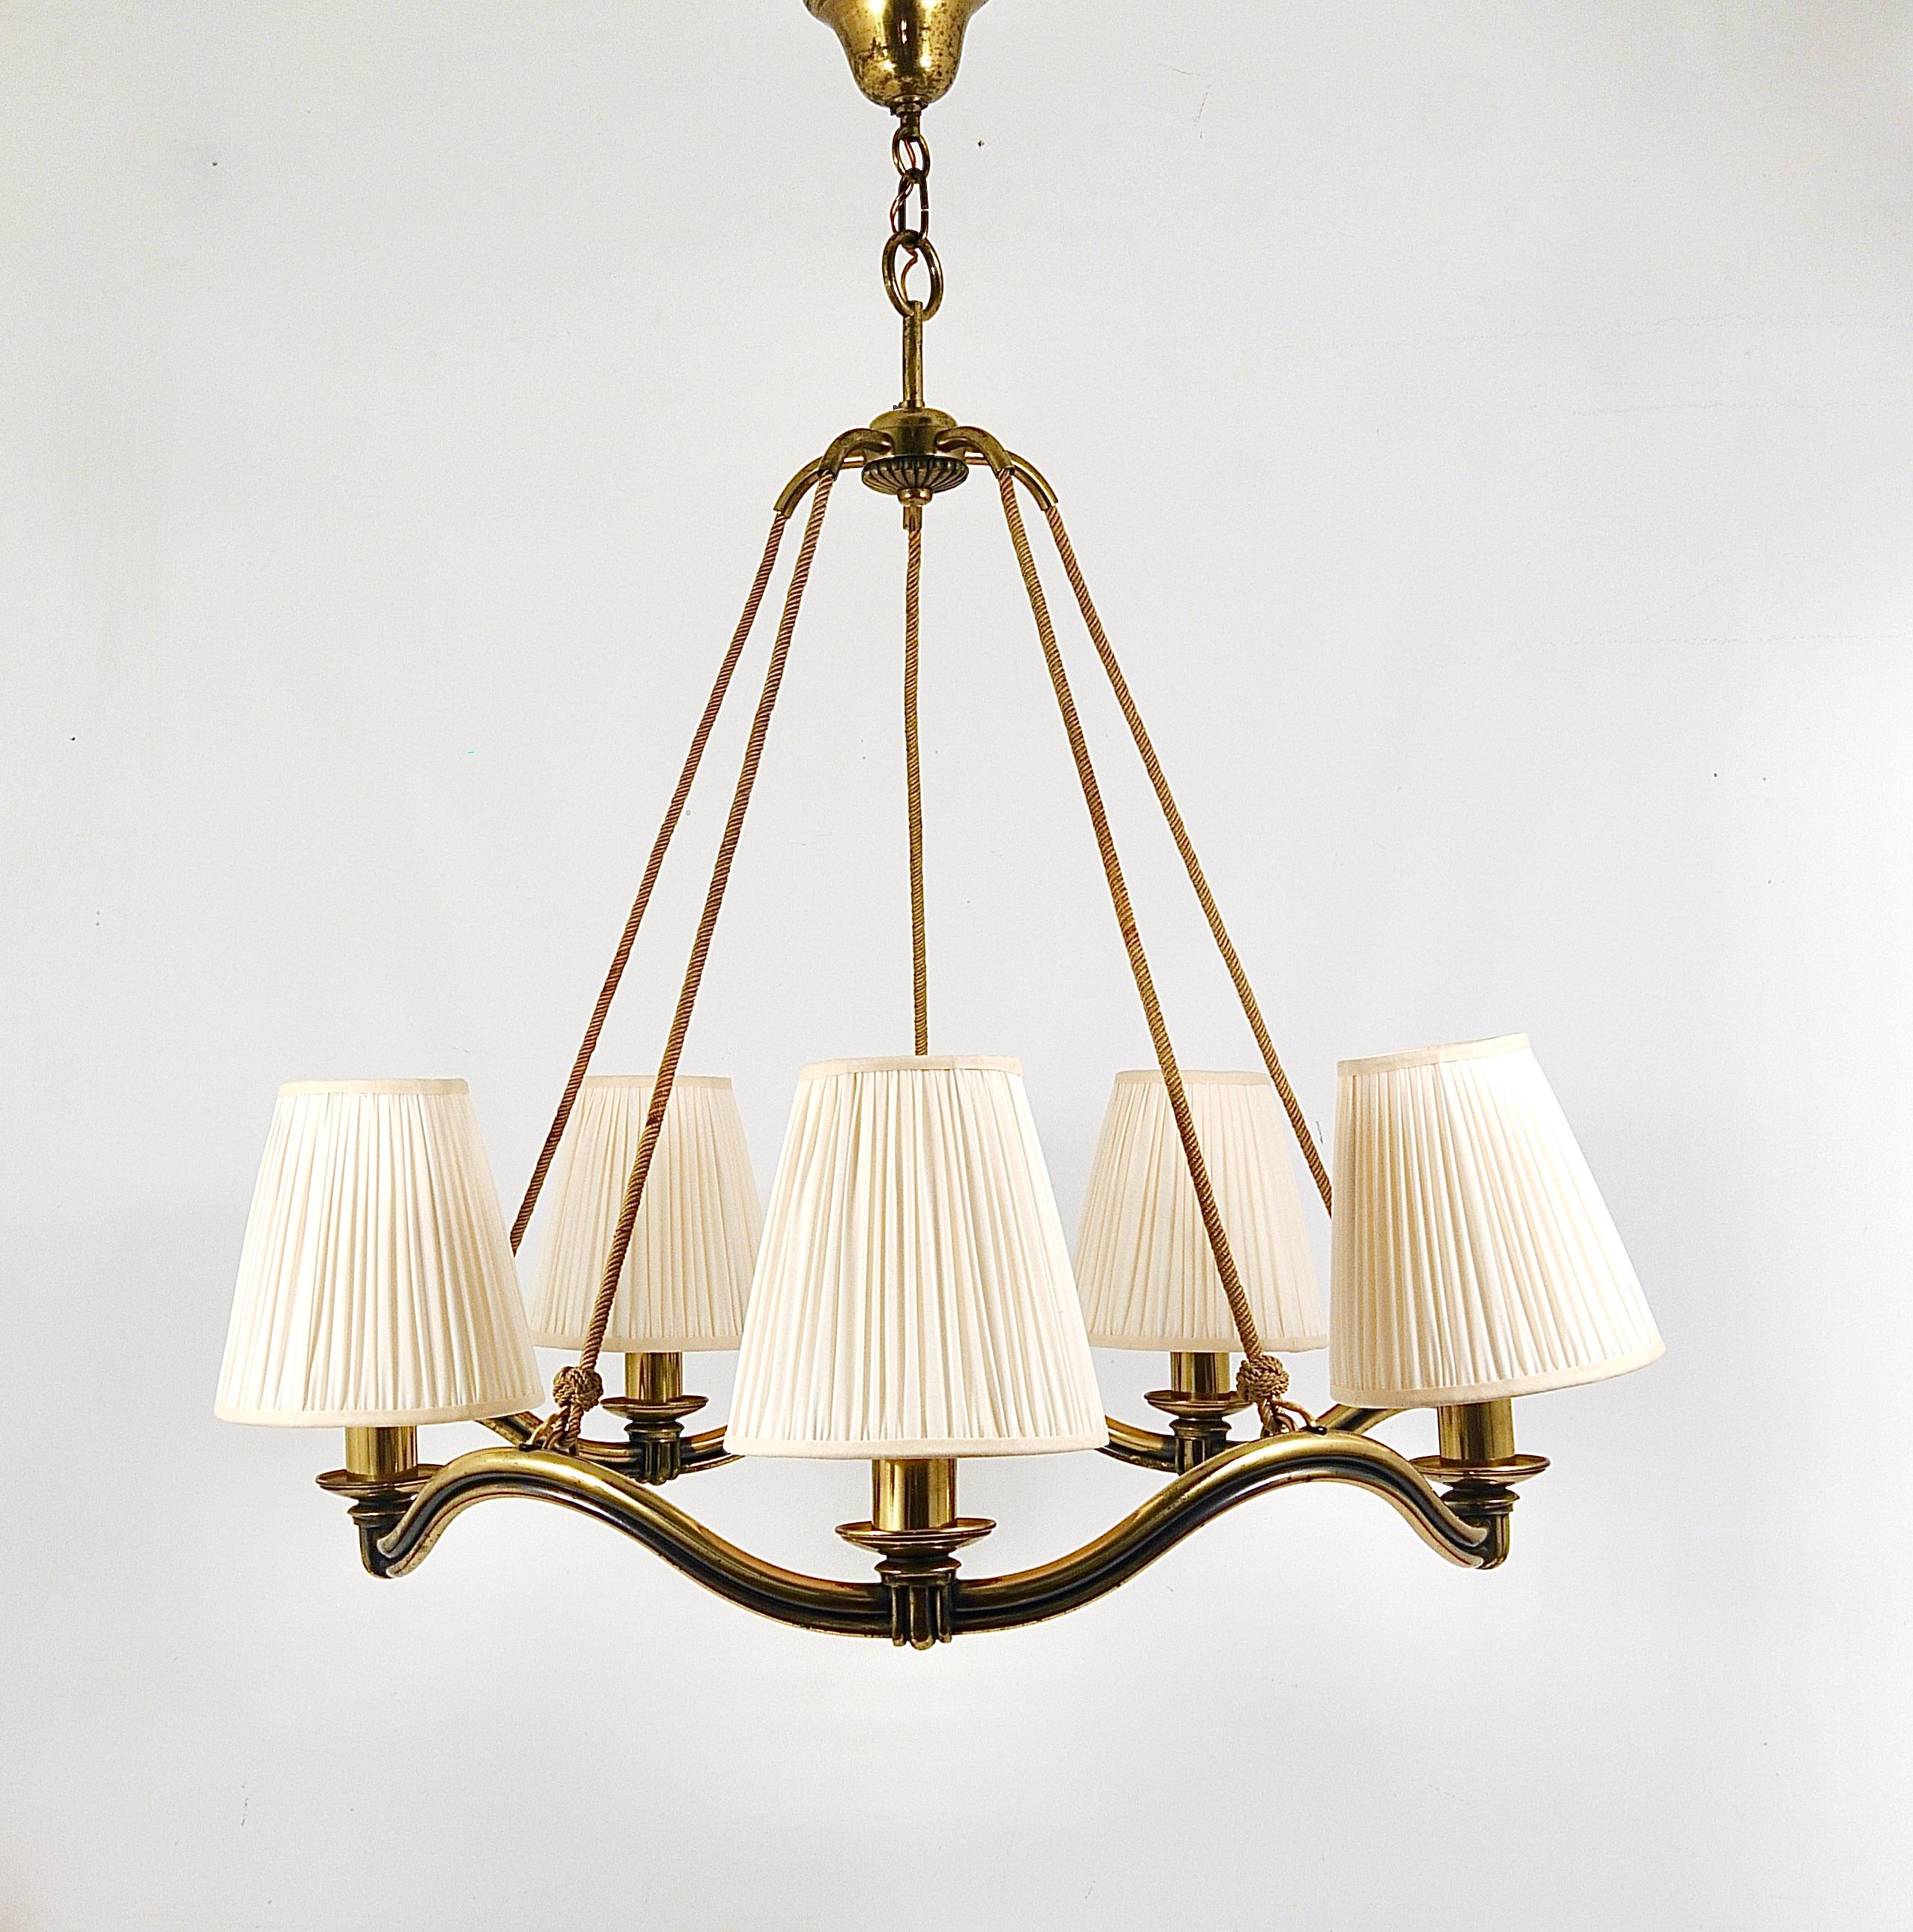 Woven Hugo Gorge Viennese Modernism Curved Brass Wave Chandelier, Austria, 1940s For Sale